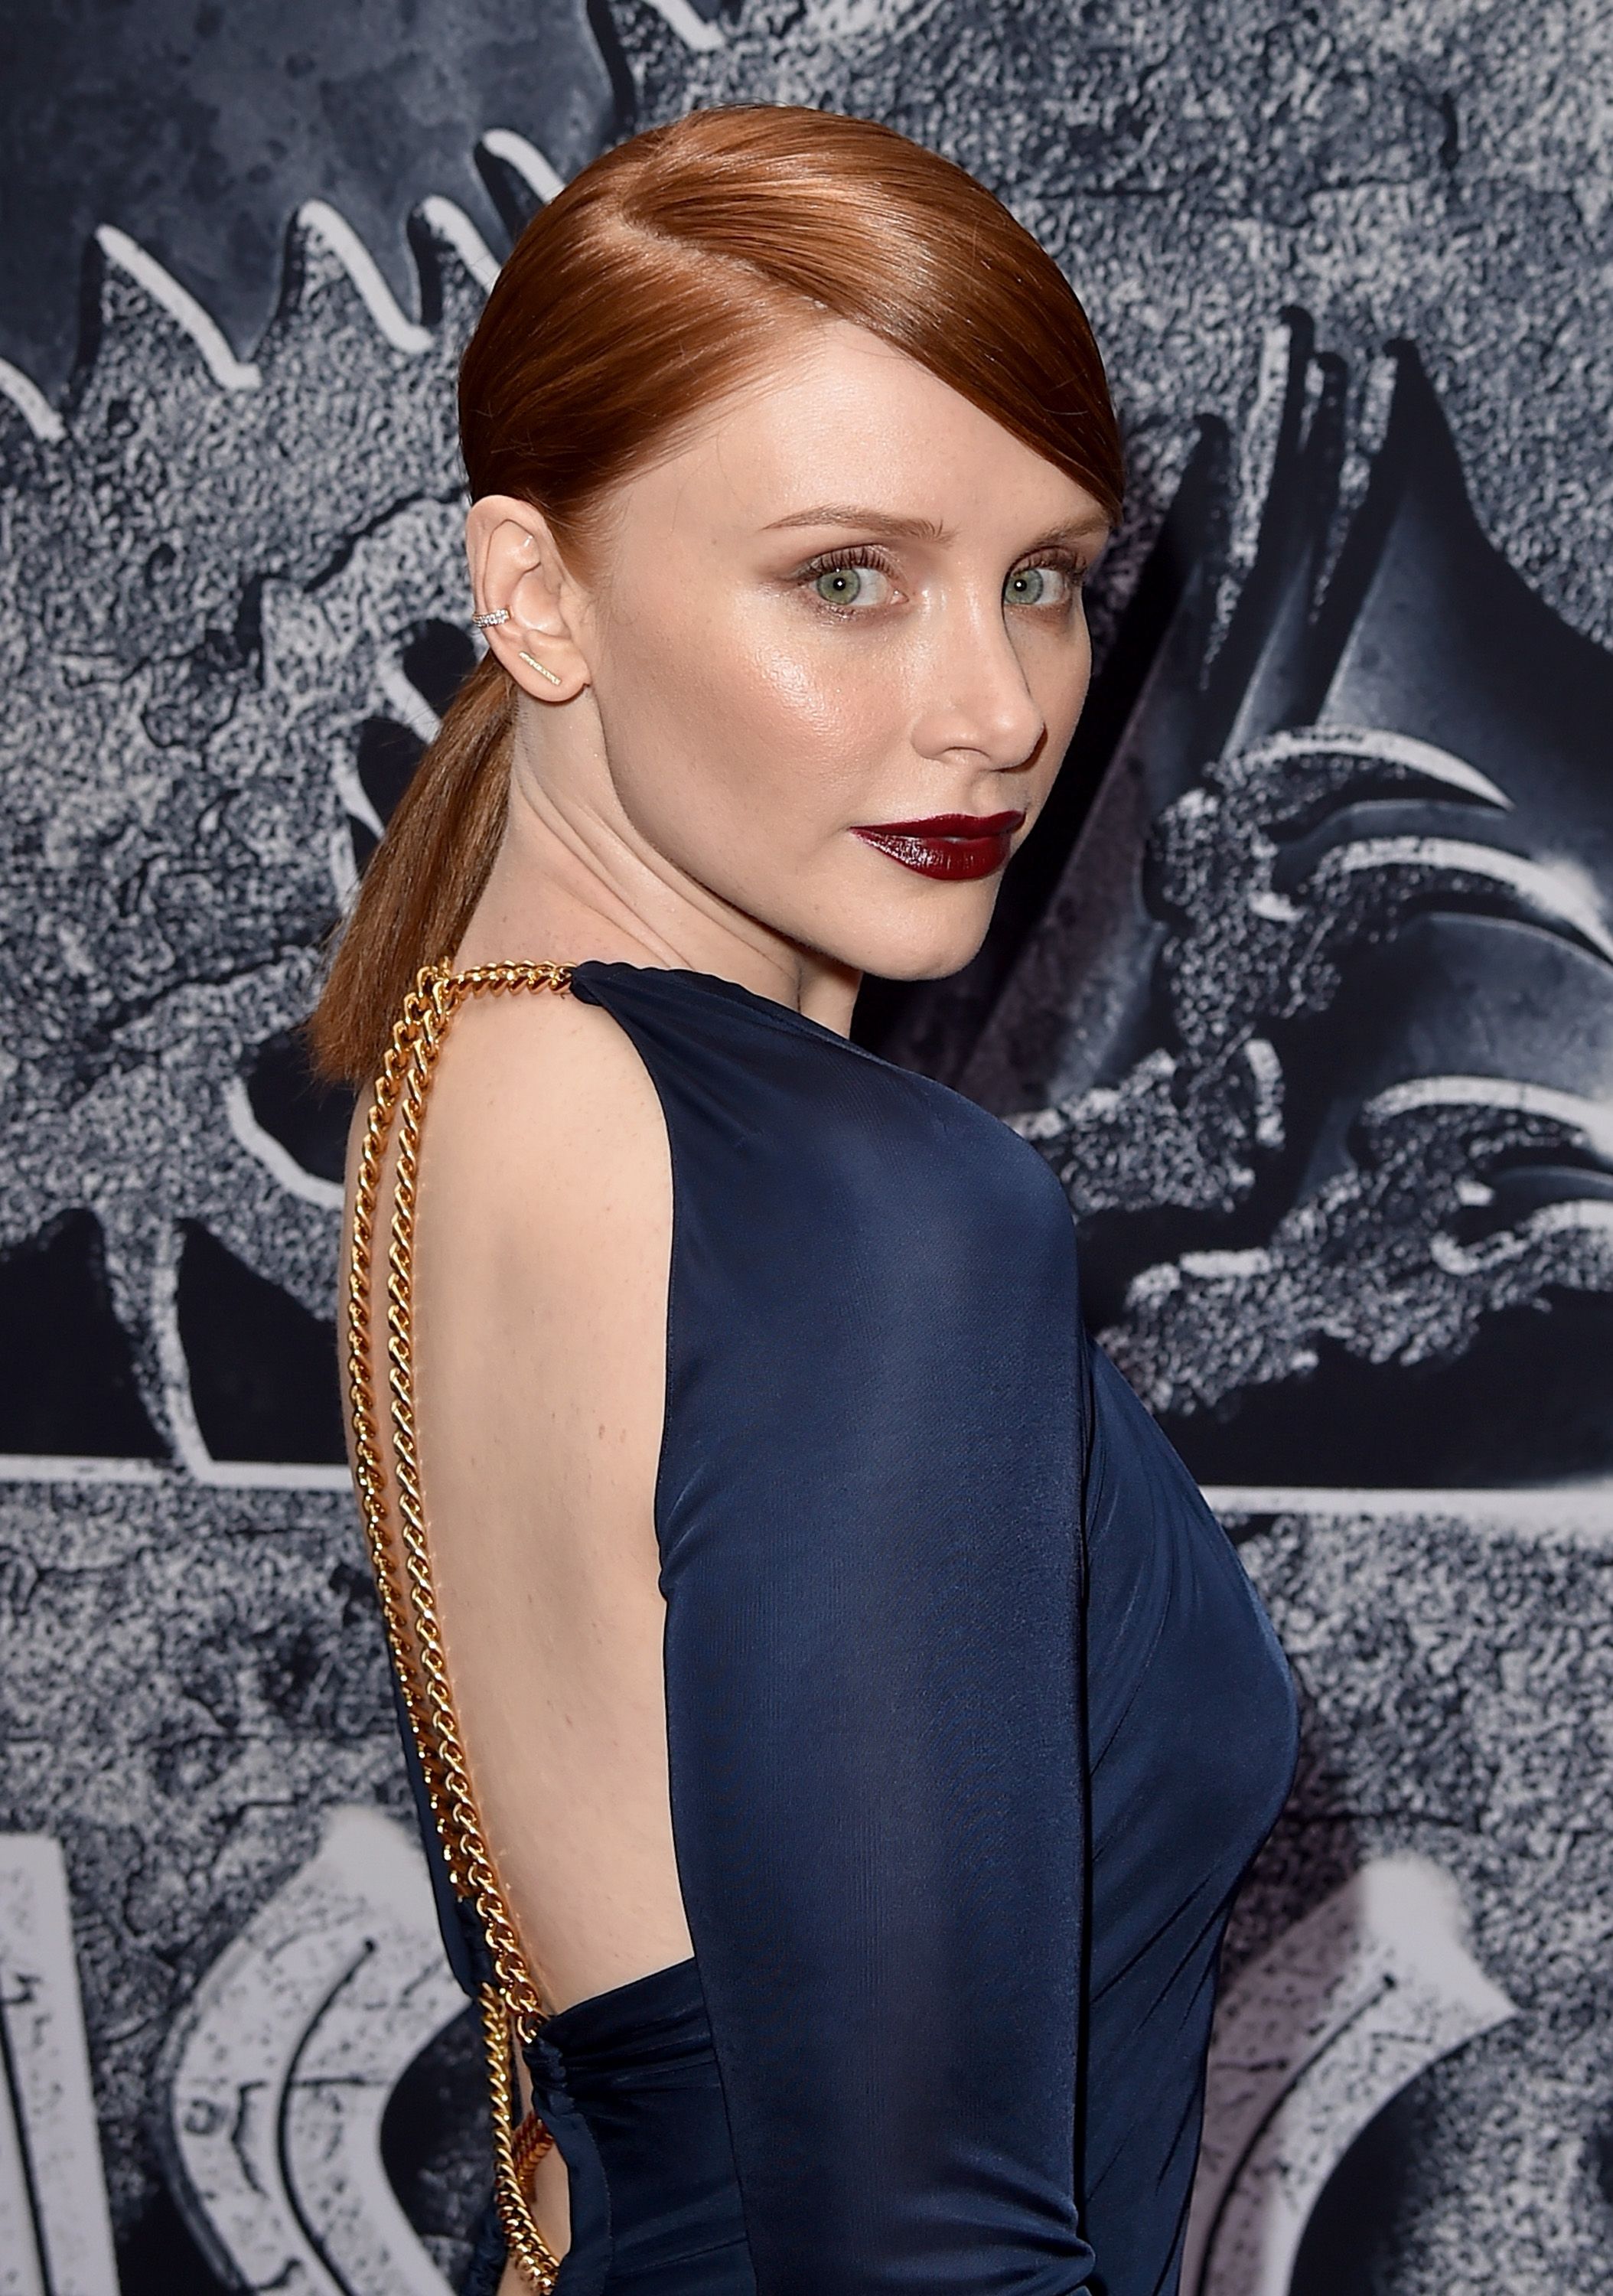 Bryce Dallas Howard at the Dolby Theatre on June 9, 2015, in Hollywood, California. | Source: Getty Images